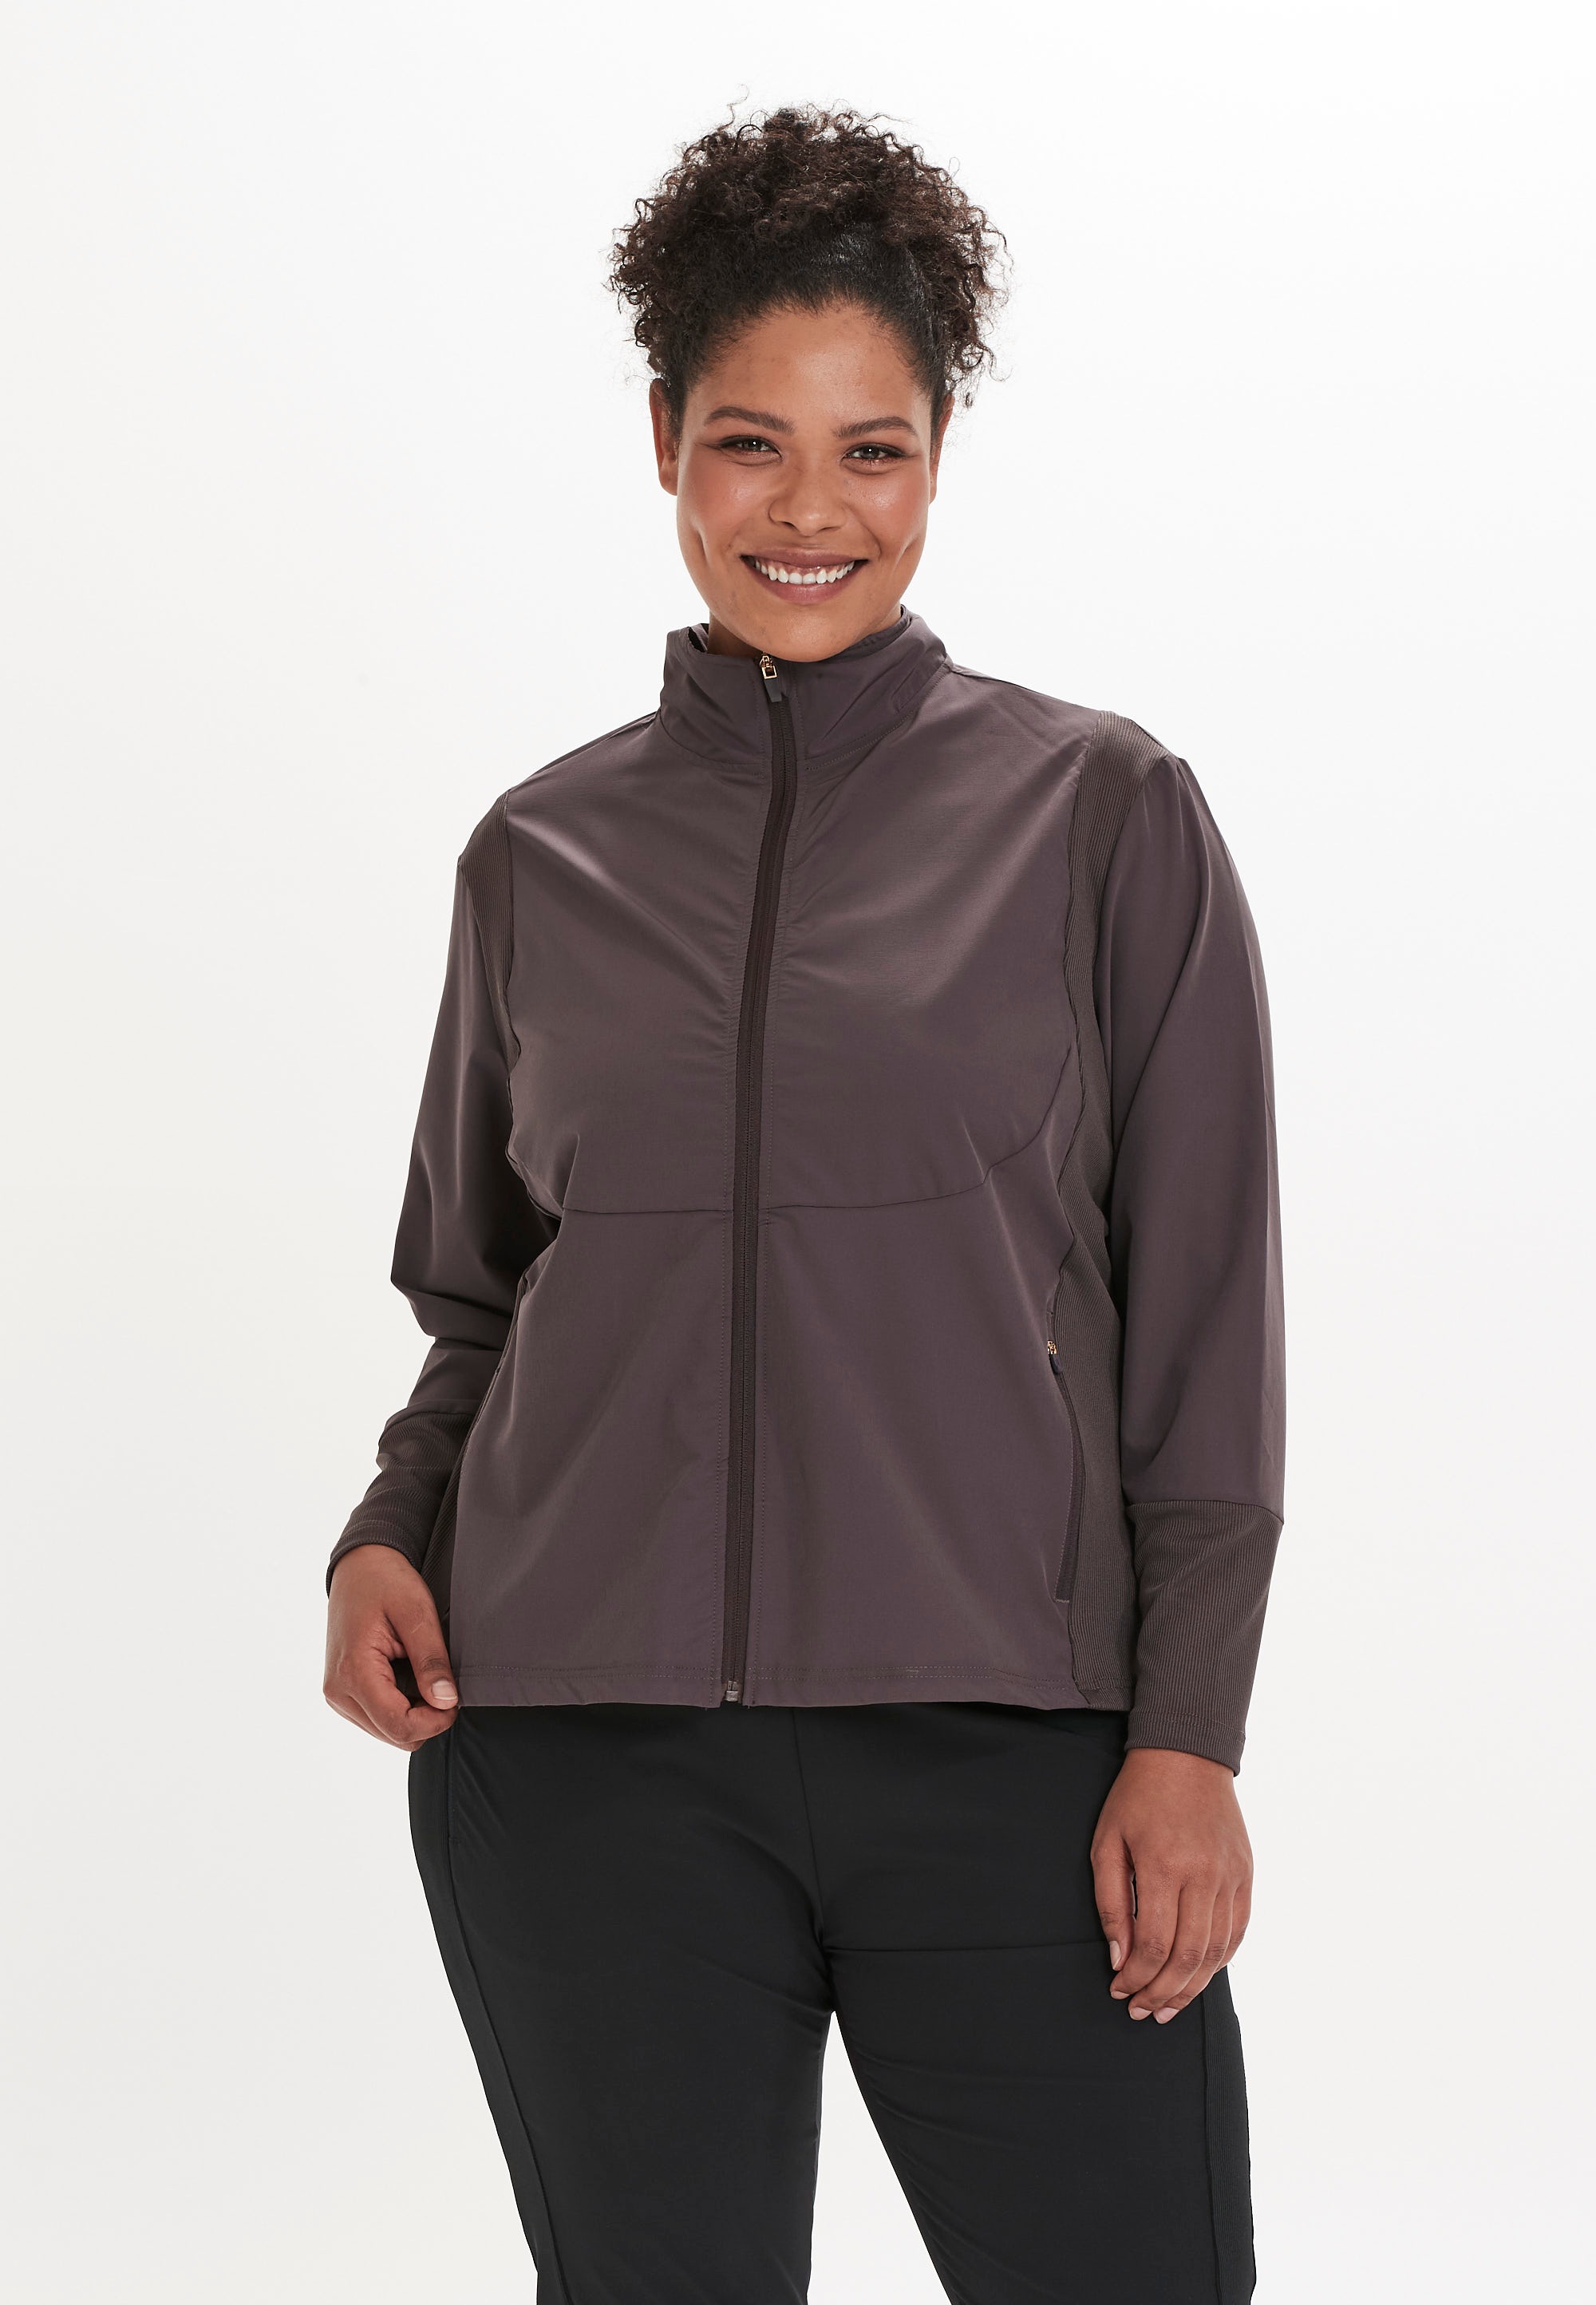 Q by Endurance Outdoorjacke »Isabely« su anti-statisc...